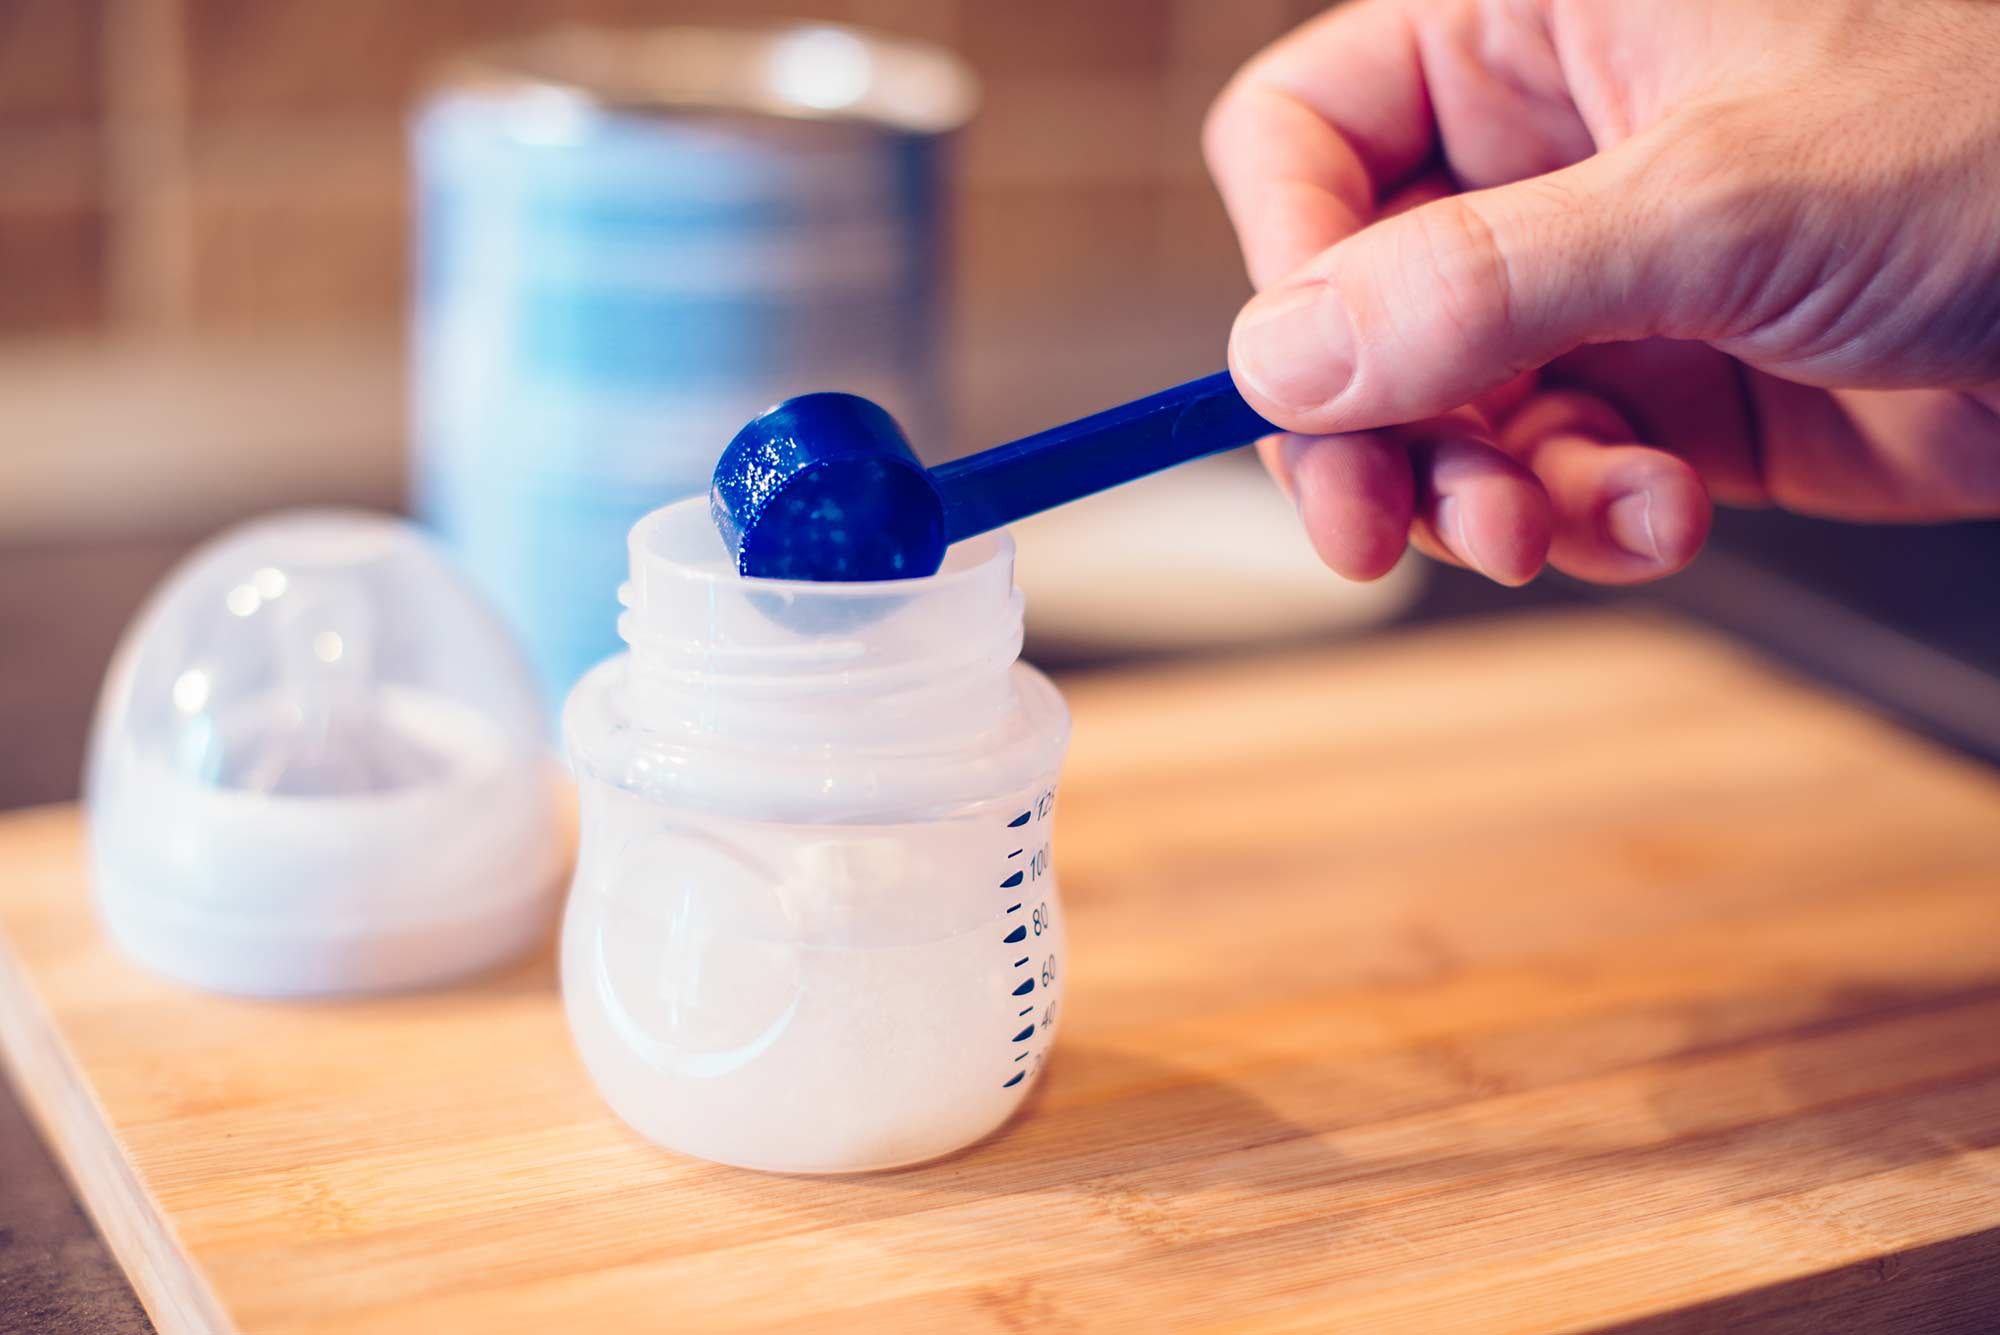 A study has found that some baby formula contains more sugar than Fanta